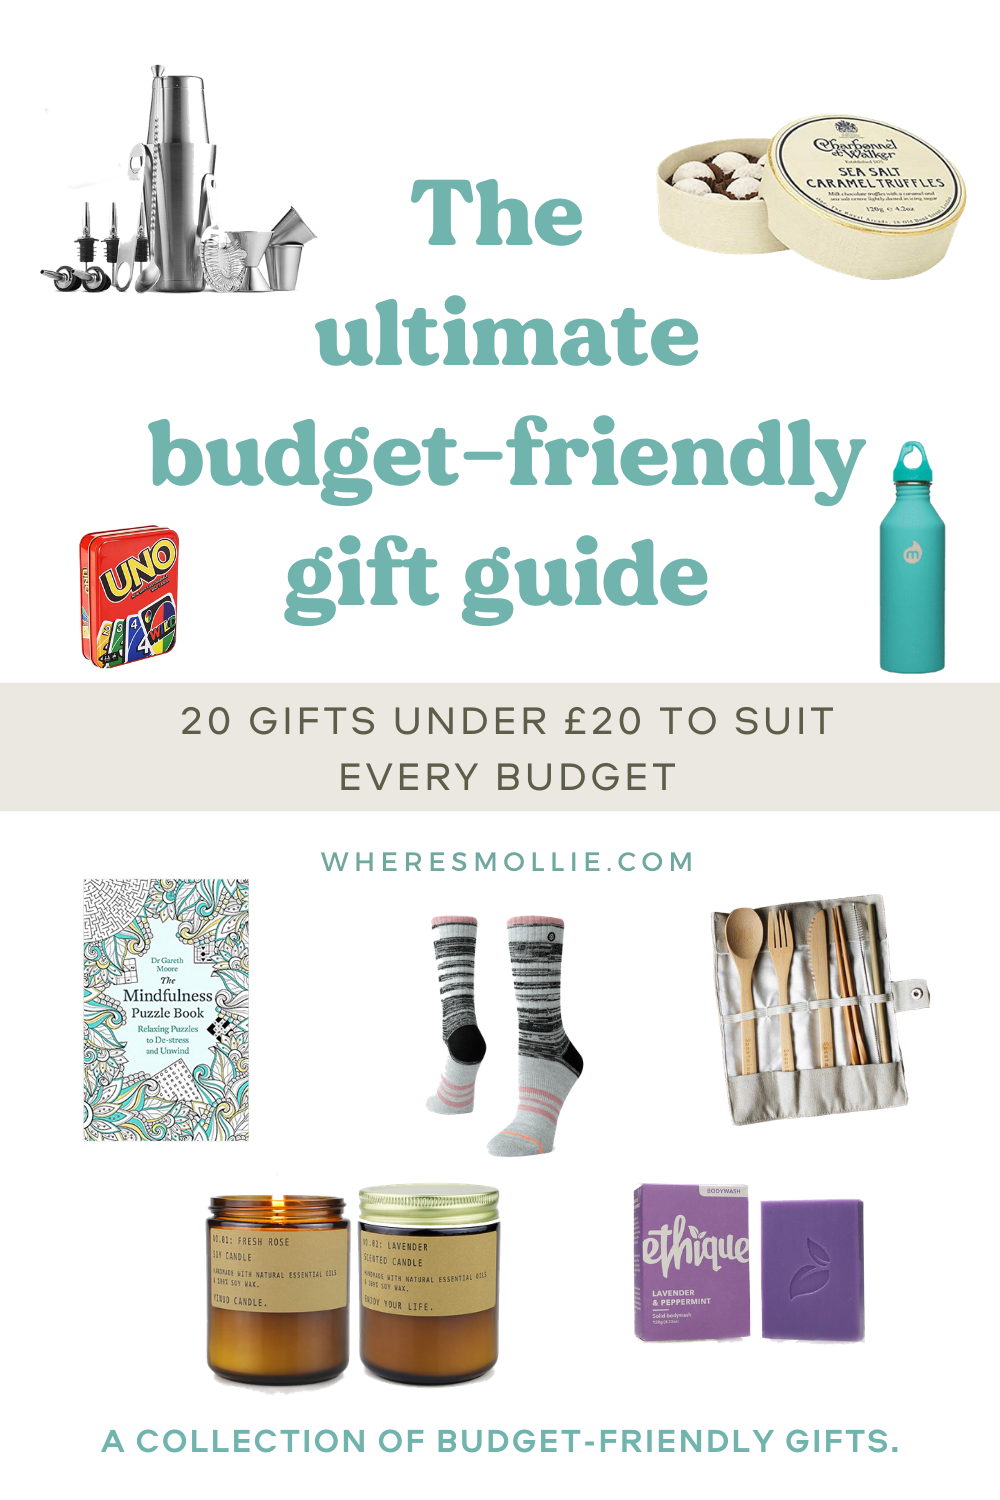 Budget friendly travel gift ideas: the ultimate gift guide